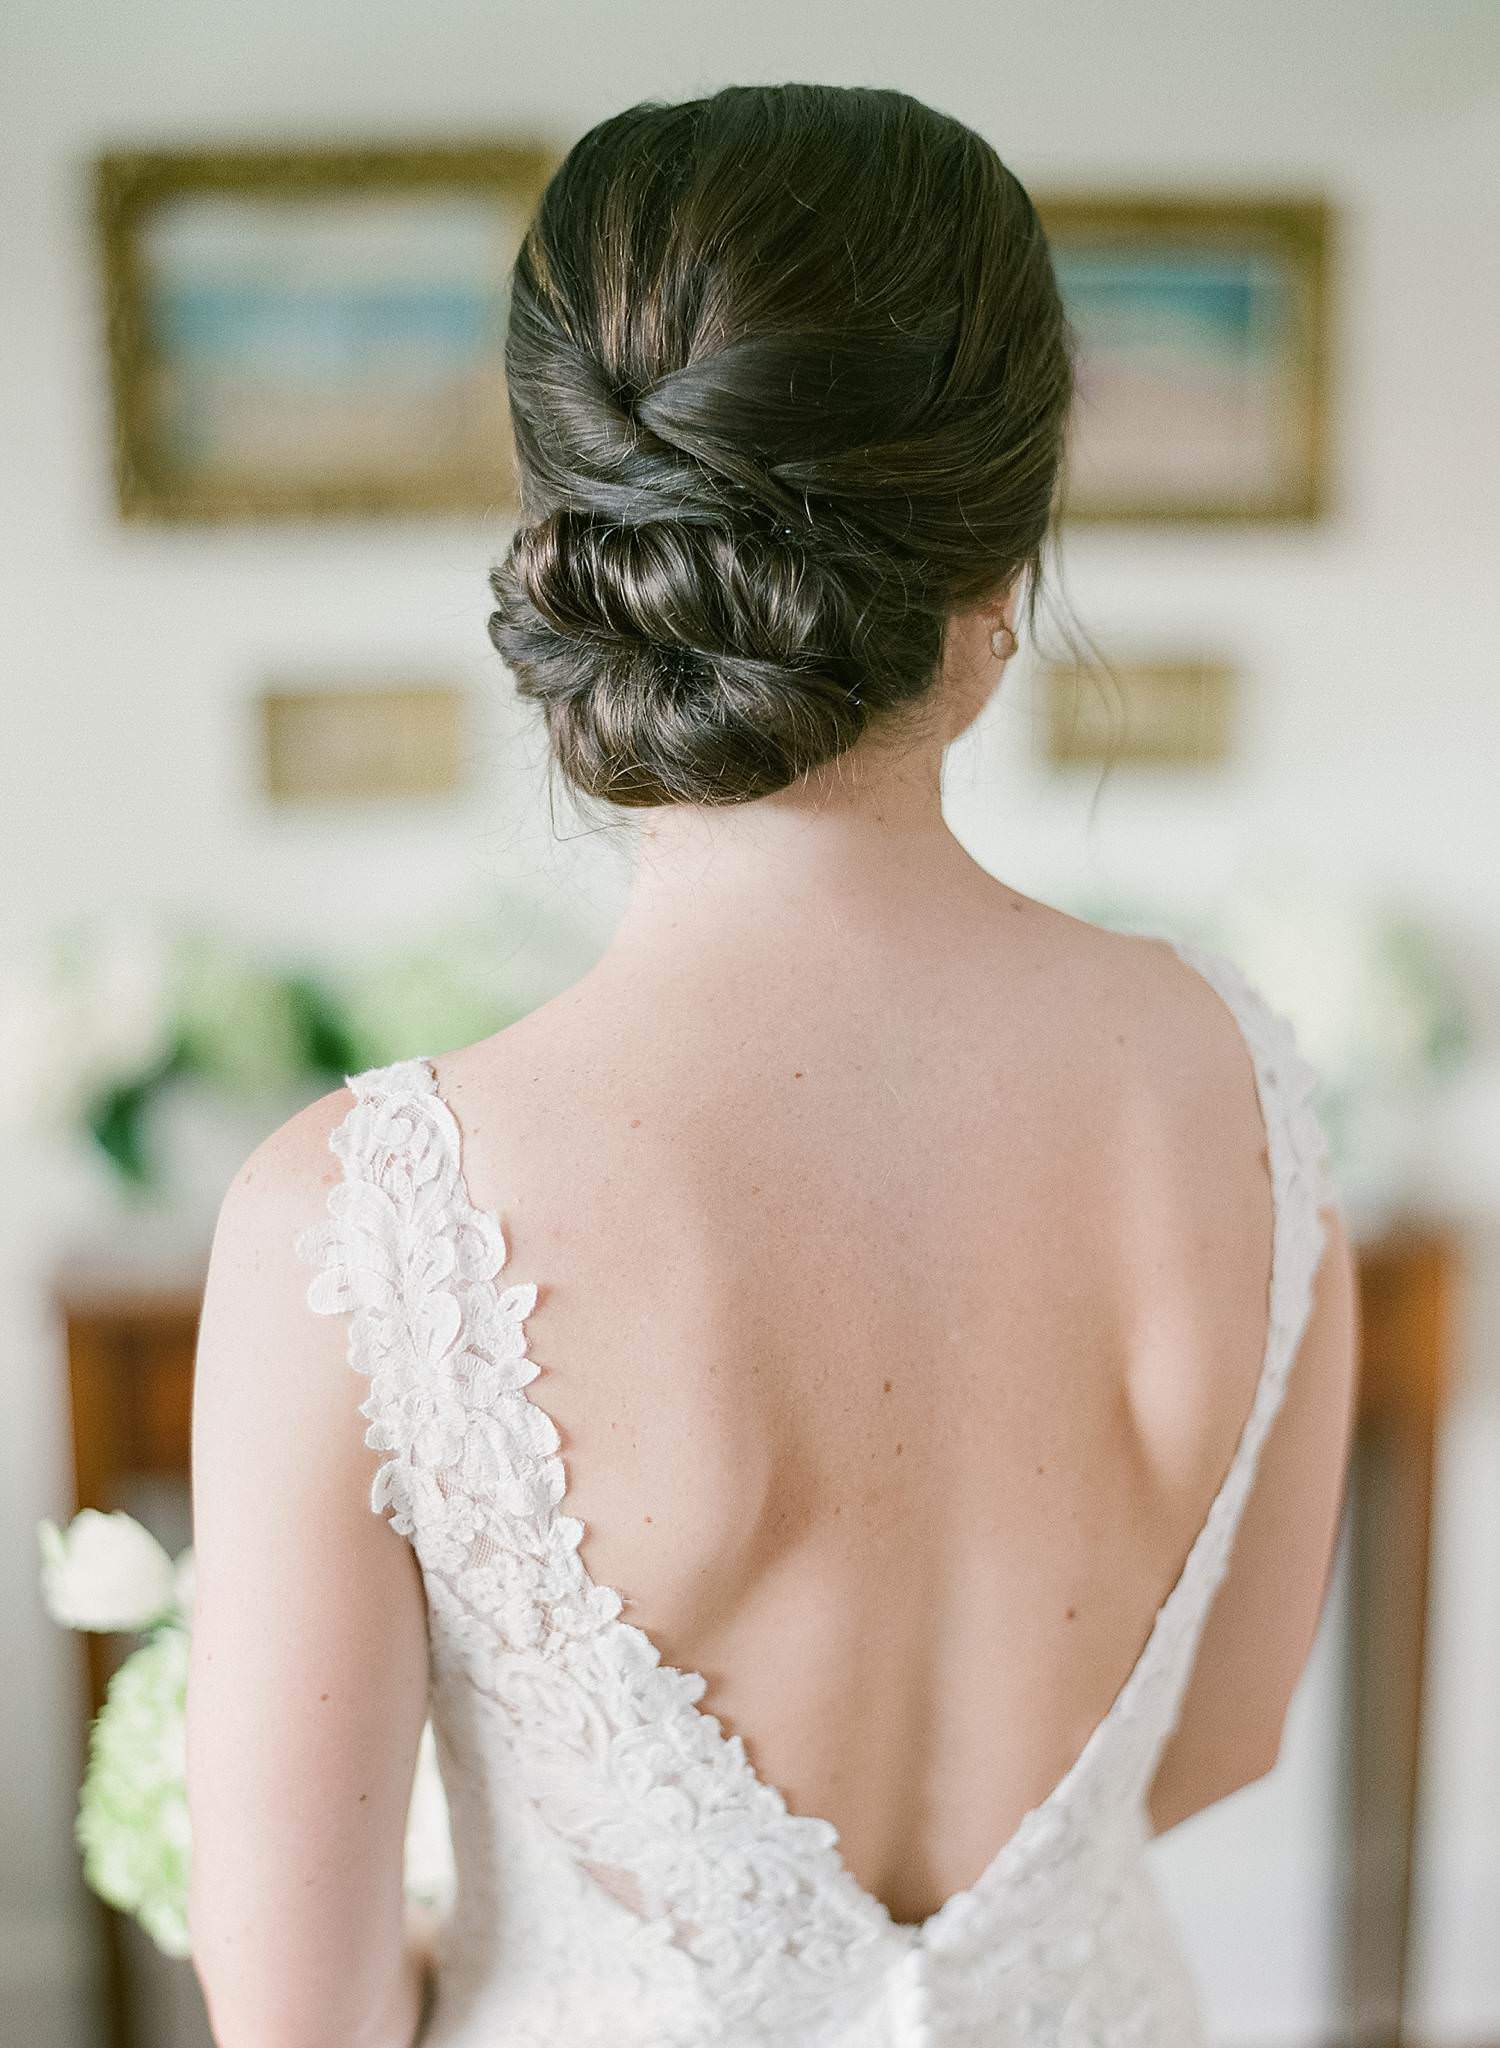 Image of bridal hair up do with bride in dress